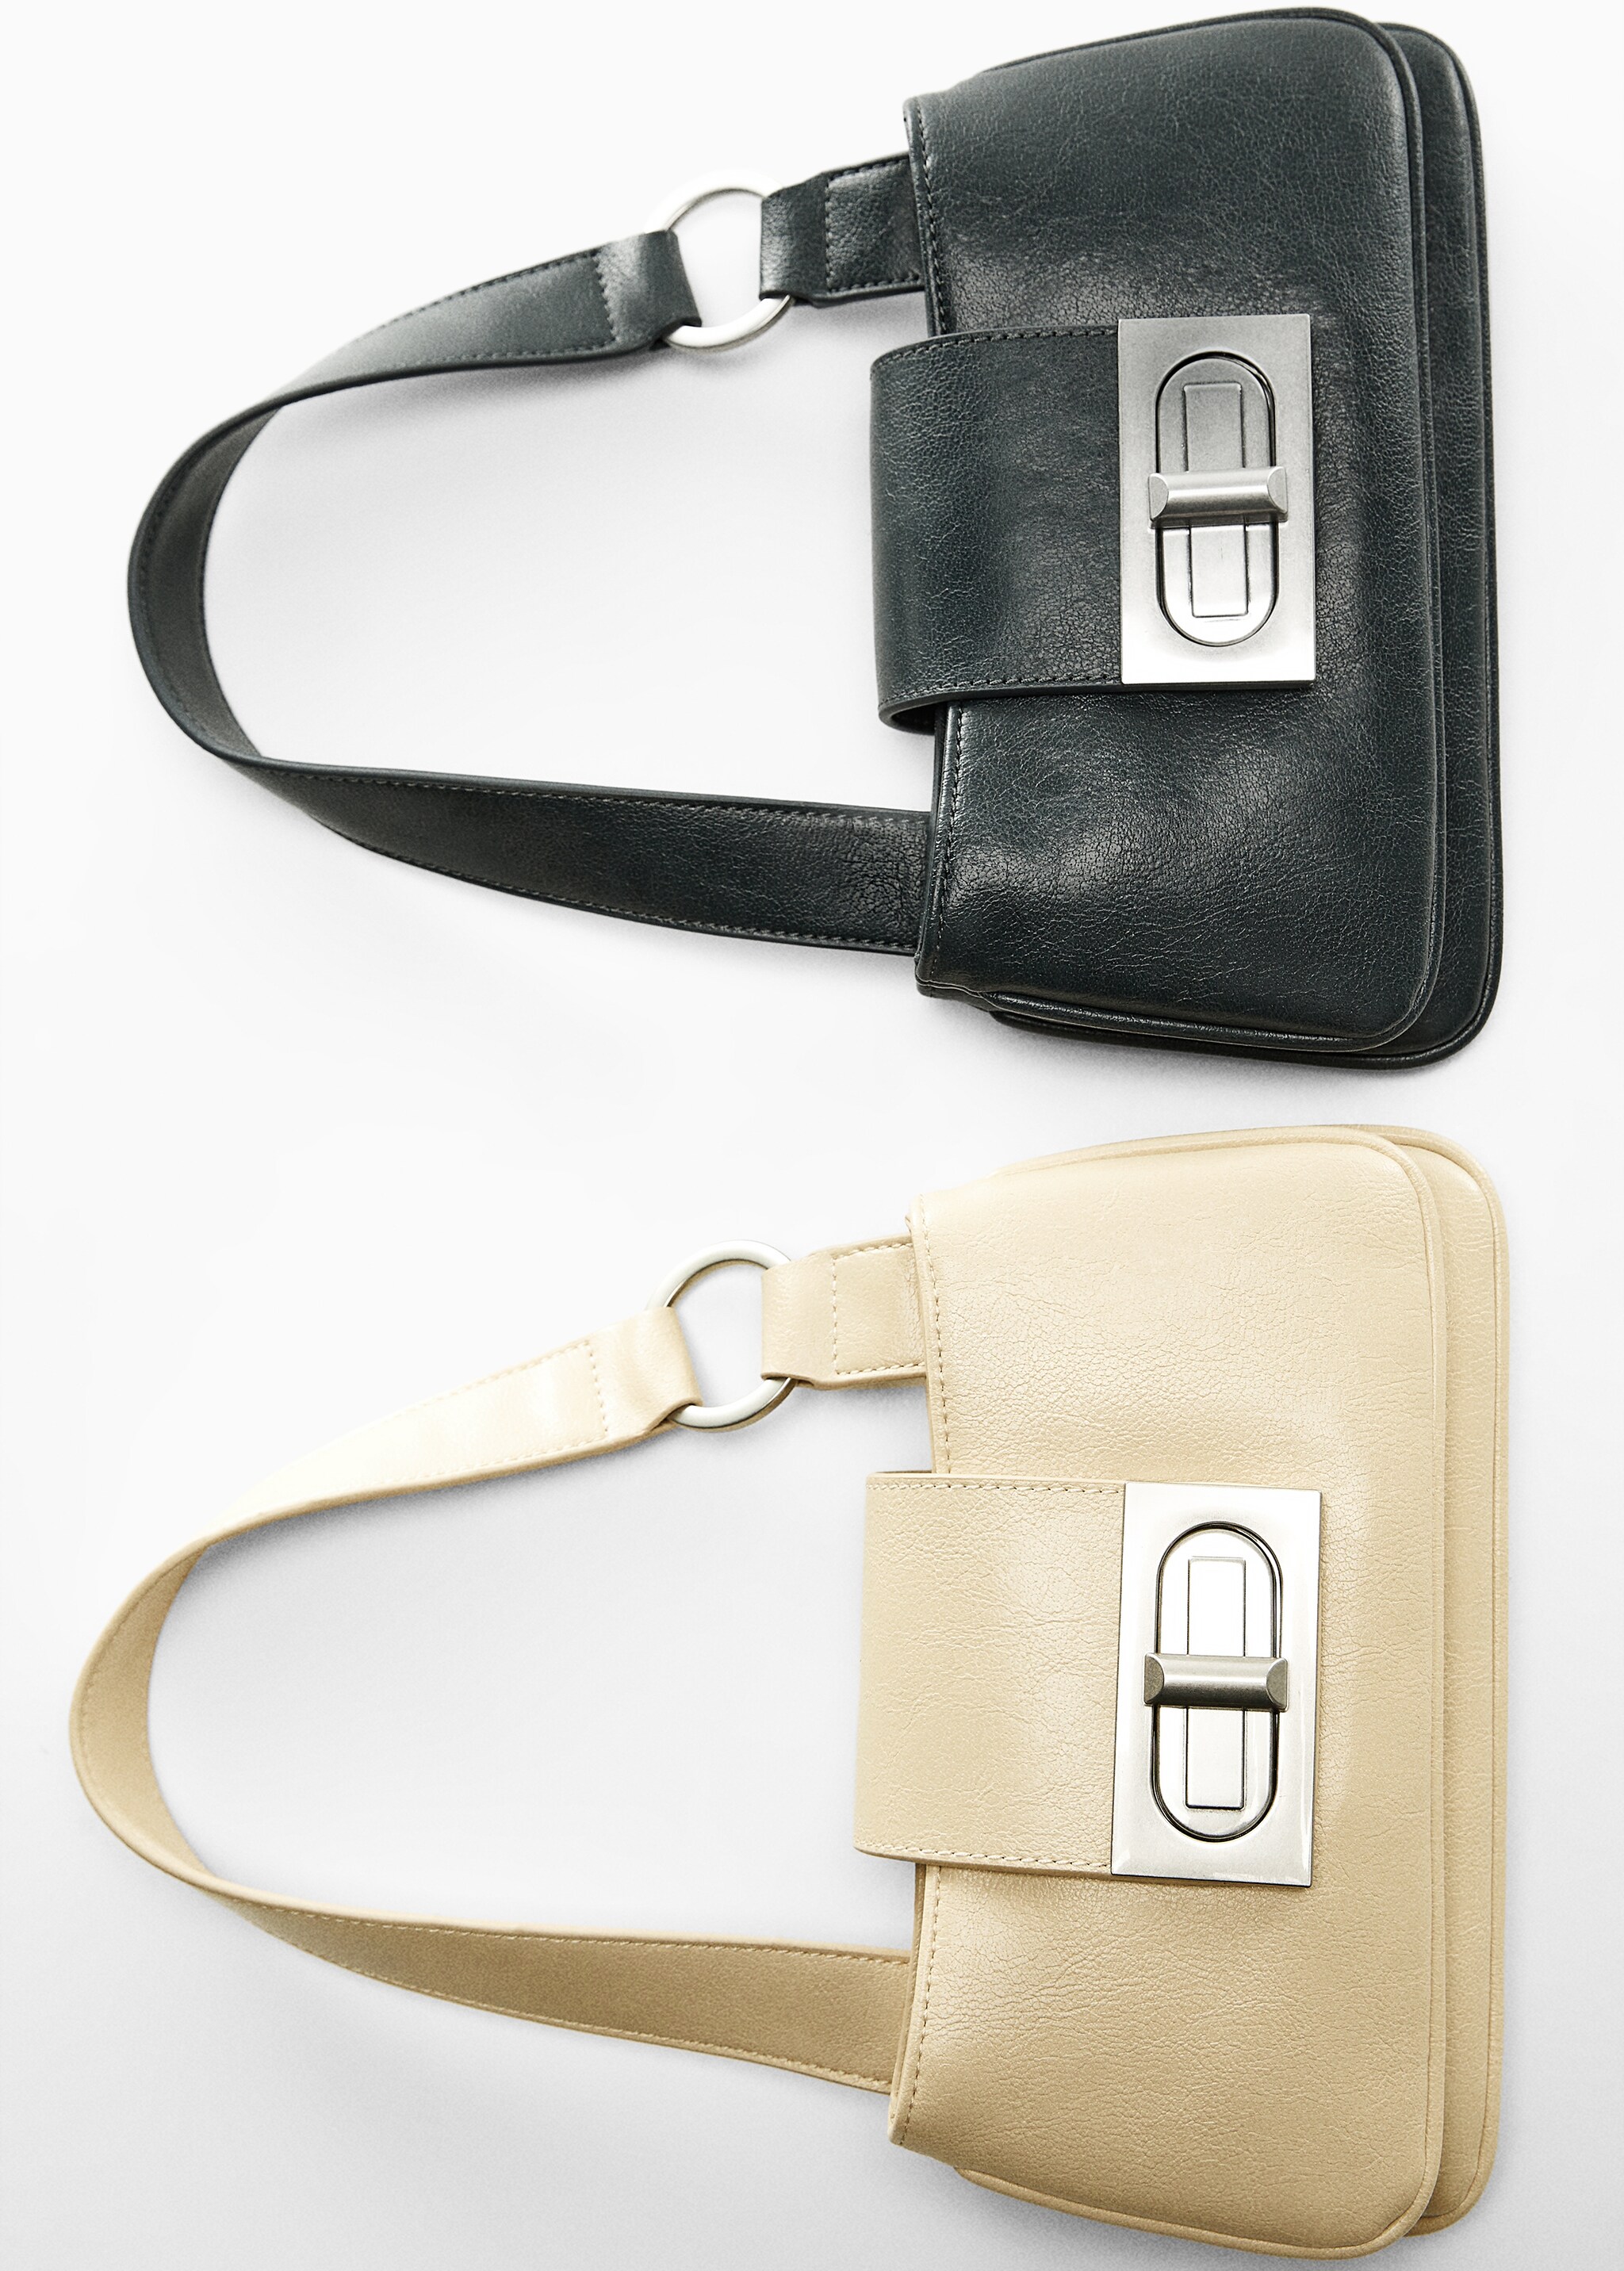 Double compartment bag - Details of the article 5